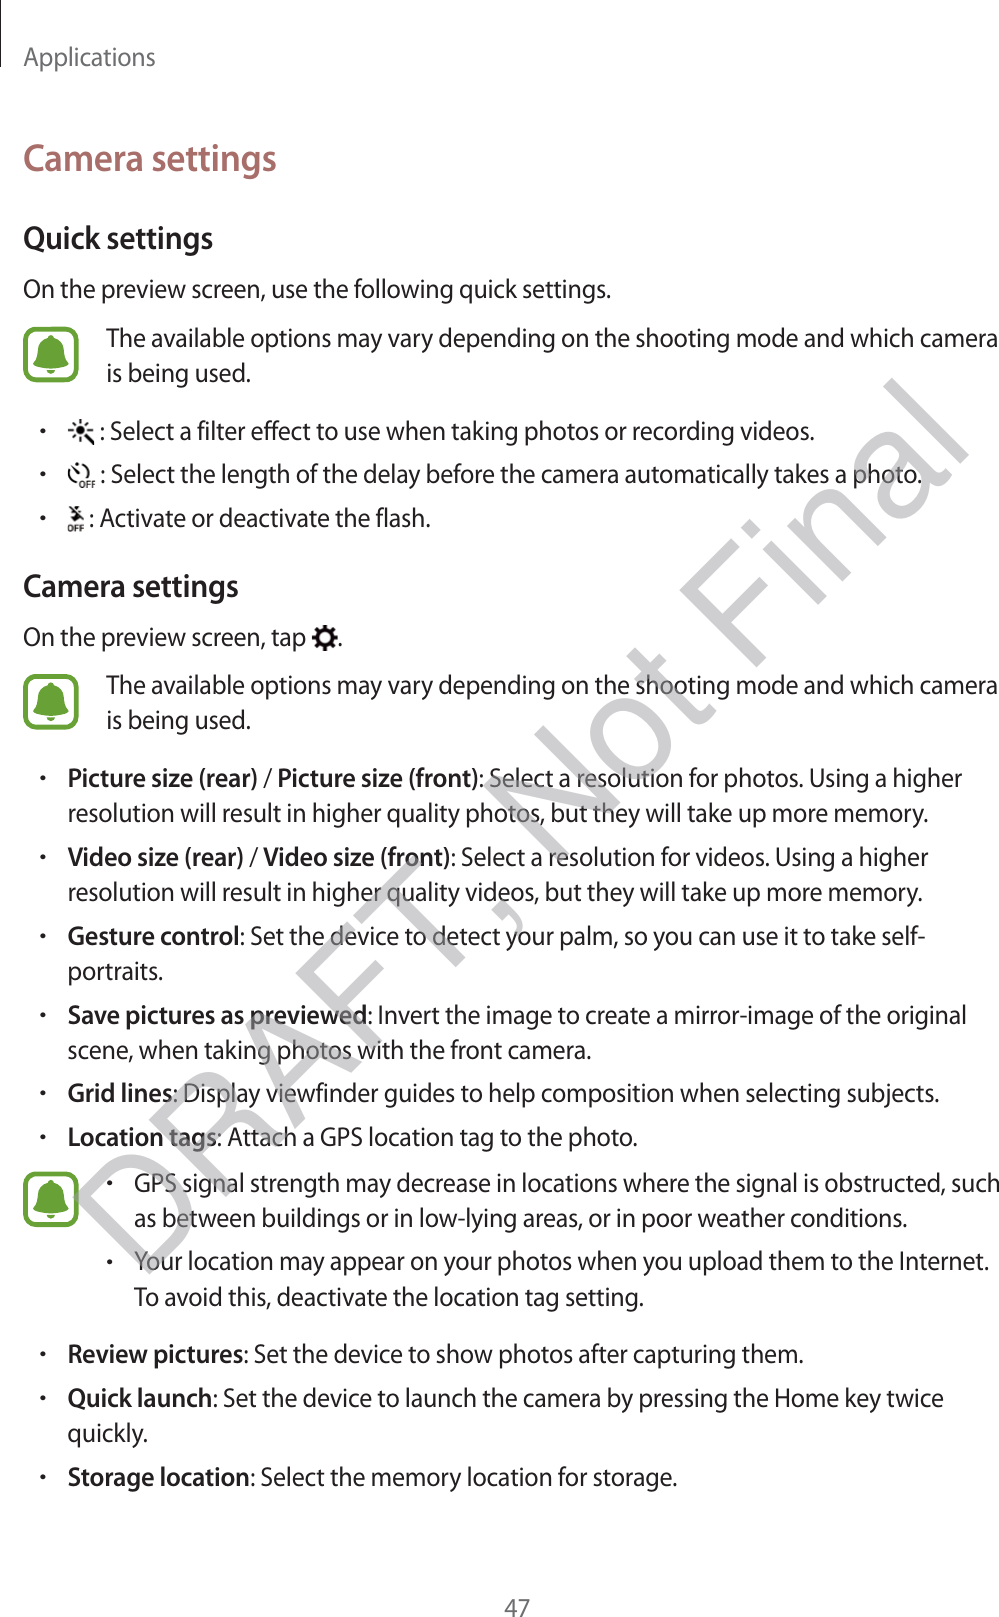 Applications47Camera settingsQuick settingsOn the preview screen, use the following quick settings.The available options may vary depending on the shooting mode and which camera is being used.r : Select a filter effect to use when taking photos or recording videos.r : Select the length of the delay before the camera automatically takes a photo.r : Activate or deactivate the flash.Camera settingsOn the preview screen, tap  .The available options may vary depending on the shooting mode and which camera is being used.rPicture size (rear) / Picture size (front): Select a resolution for photos. Using a higher resolution will result in higher quality photos, but they will take up more memory.rVideo size (rear) / Video size (front): Select a resolution for videos. Using a higher resolution will result in higher quality videos, but they will take up more memory.rGesture control: Set the device to detect your palm, so you can use it to take self-portraits.rSave pictures as previewed: Invert the image to create a mirror-image of the original scene, when taking photos with the front camera.rGrid lines: Display viewfinder guides to help composition when selecting subjects.rLocation tags: Attach a GPS location tag to the photo.rGPS signal strength may decrease in locations where the signal is obstructed, such as between buildings or in low-lying areas, or in poor weather conditions.rYour location may appear on your photos when you upload them to the Internet. To avoid this, deactivate the location tag setting.rReview pictures: Set the device to show photos after capturing them.rQuick launch: Set the device to launch the camera by pressing the Home key twice quickly.rStorage location: Select the memory location for storage.DRAFT, Not Final